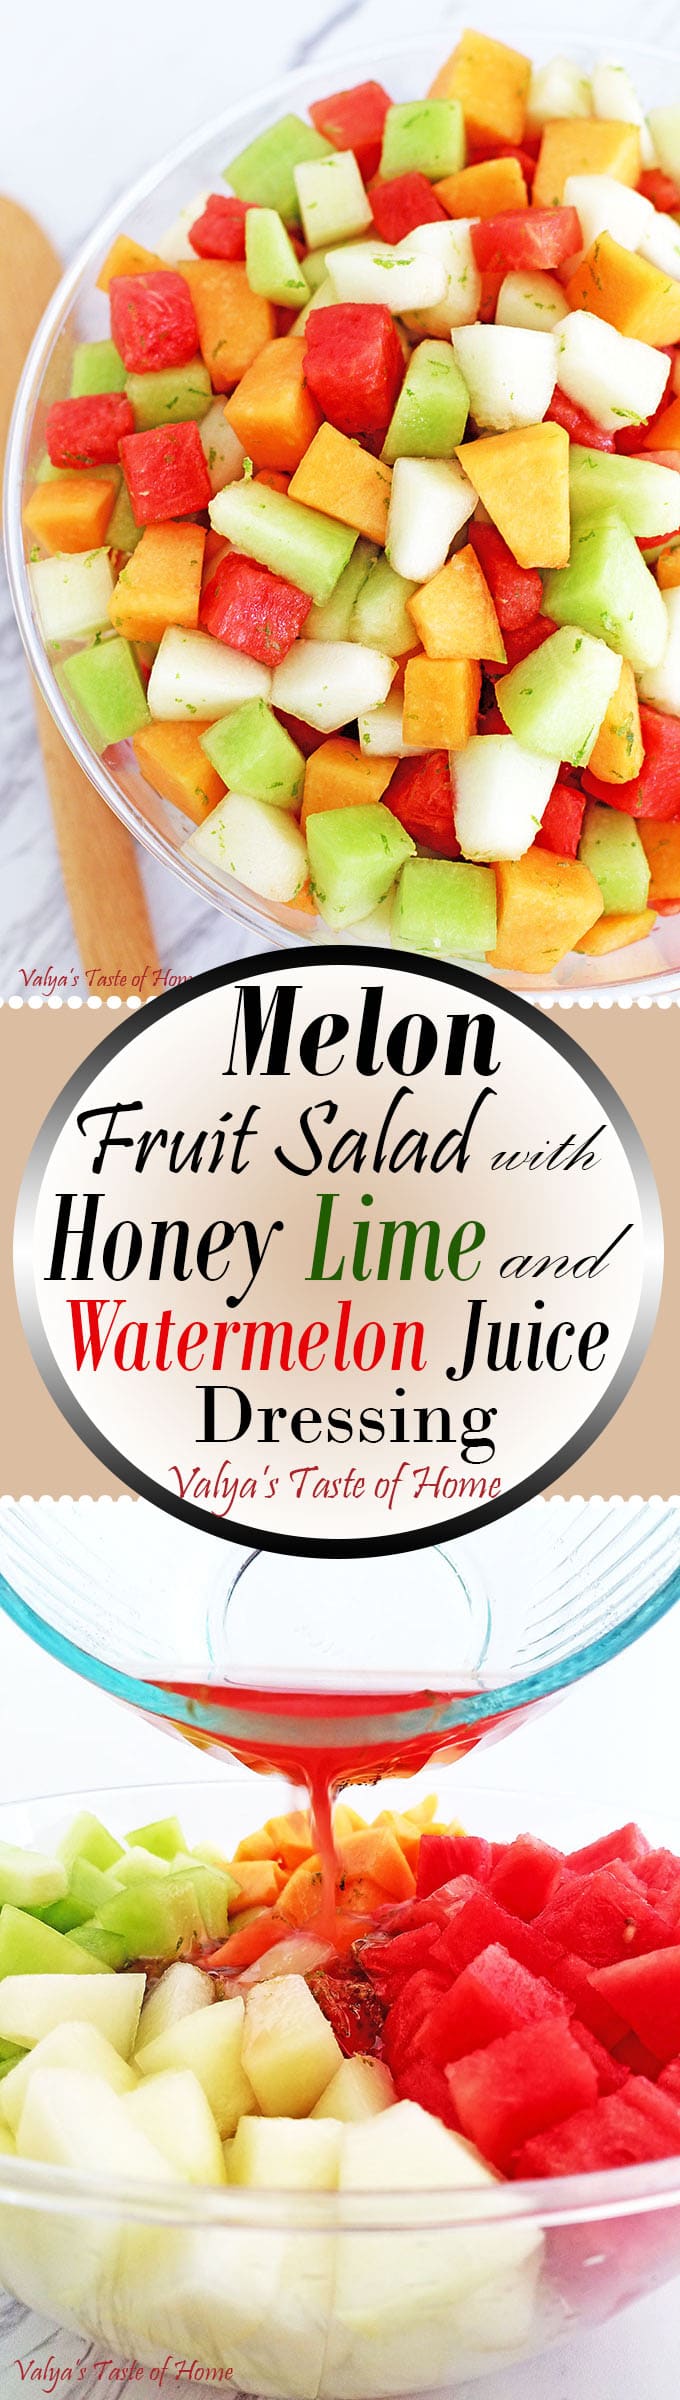 What can be better than a bowl of chilled Melon Fruit Salad with Honey Lime and Watermelon Juice Dressing on a hot summer day? While you shouldn’t abandon your water consumption, a nice bowl of this refreshing watery fruit with a touch of sweetness is sure to hit that thirsty and sweet spot. It’s a brilliant addition to any outdoor party.